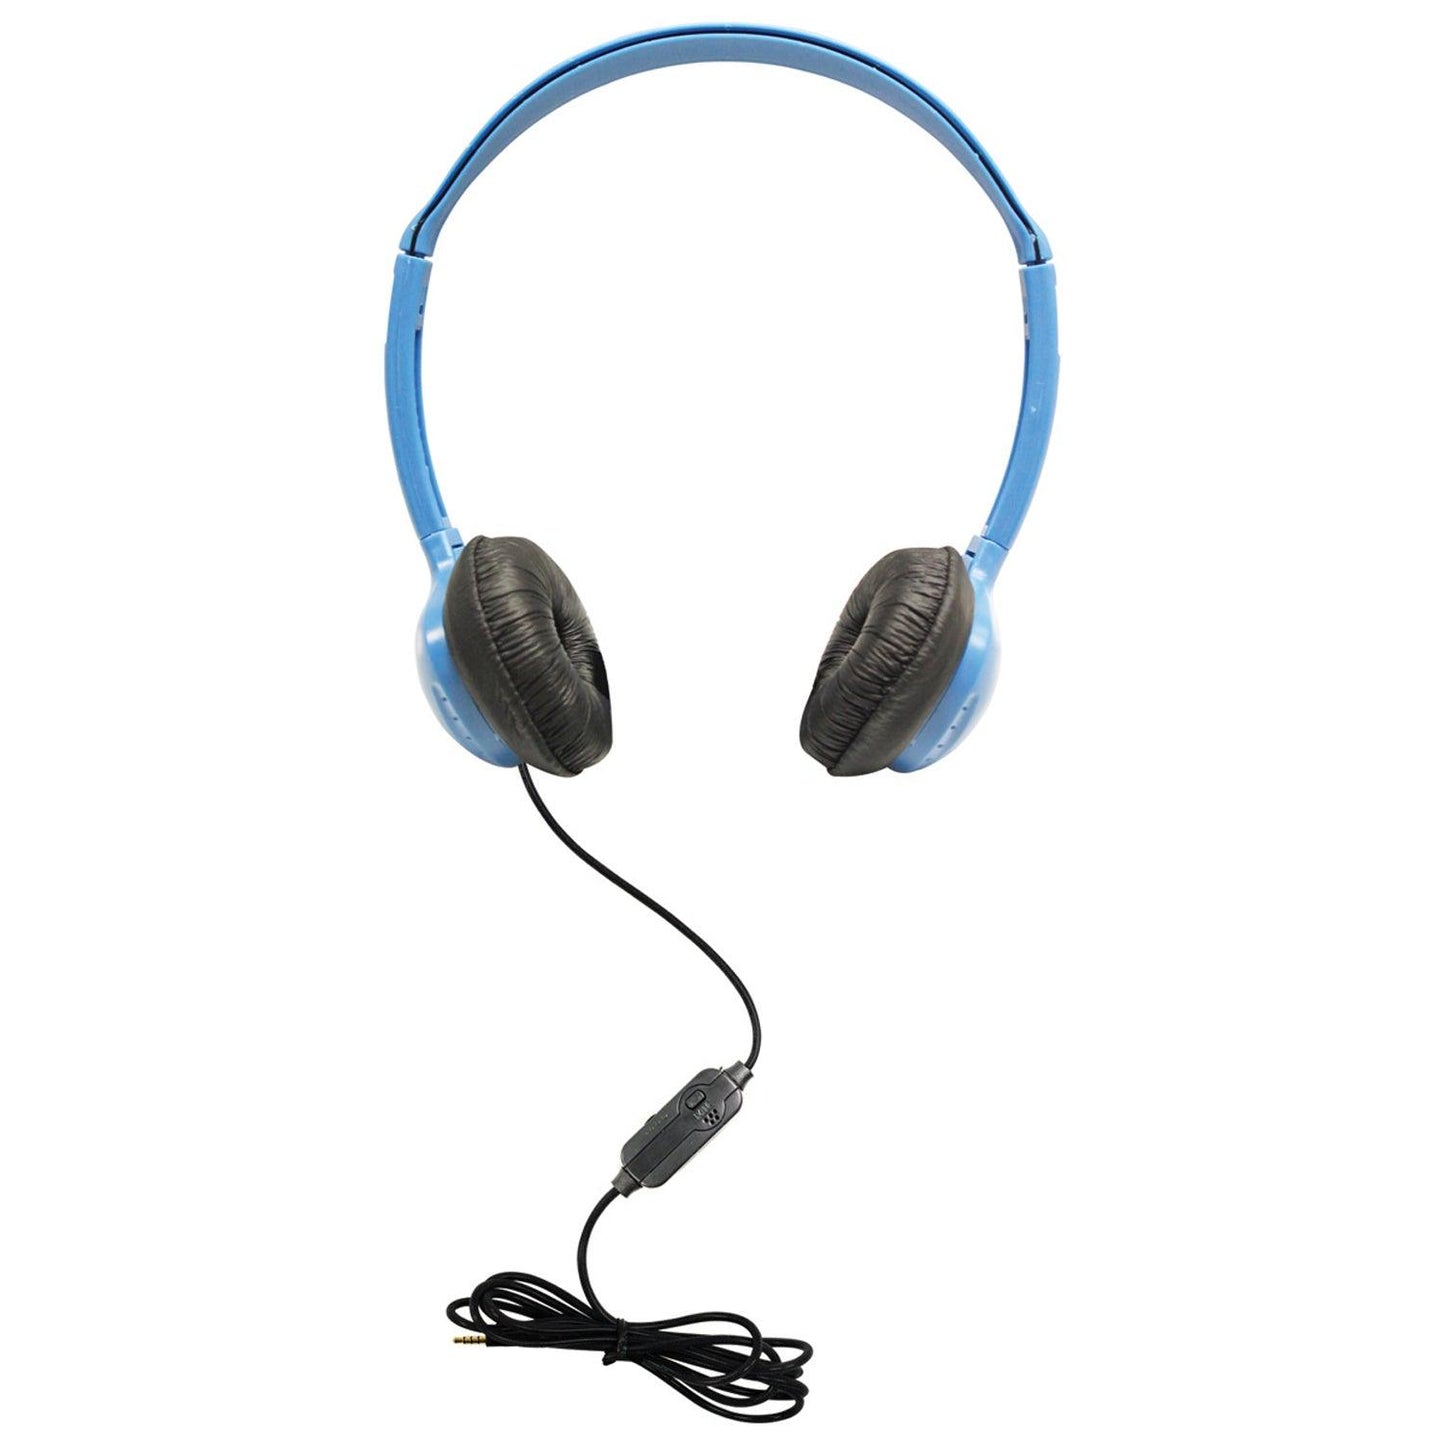 Personal Headset with In-Line Microphone and TRRS Plug - Loomini